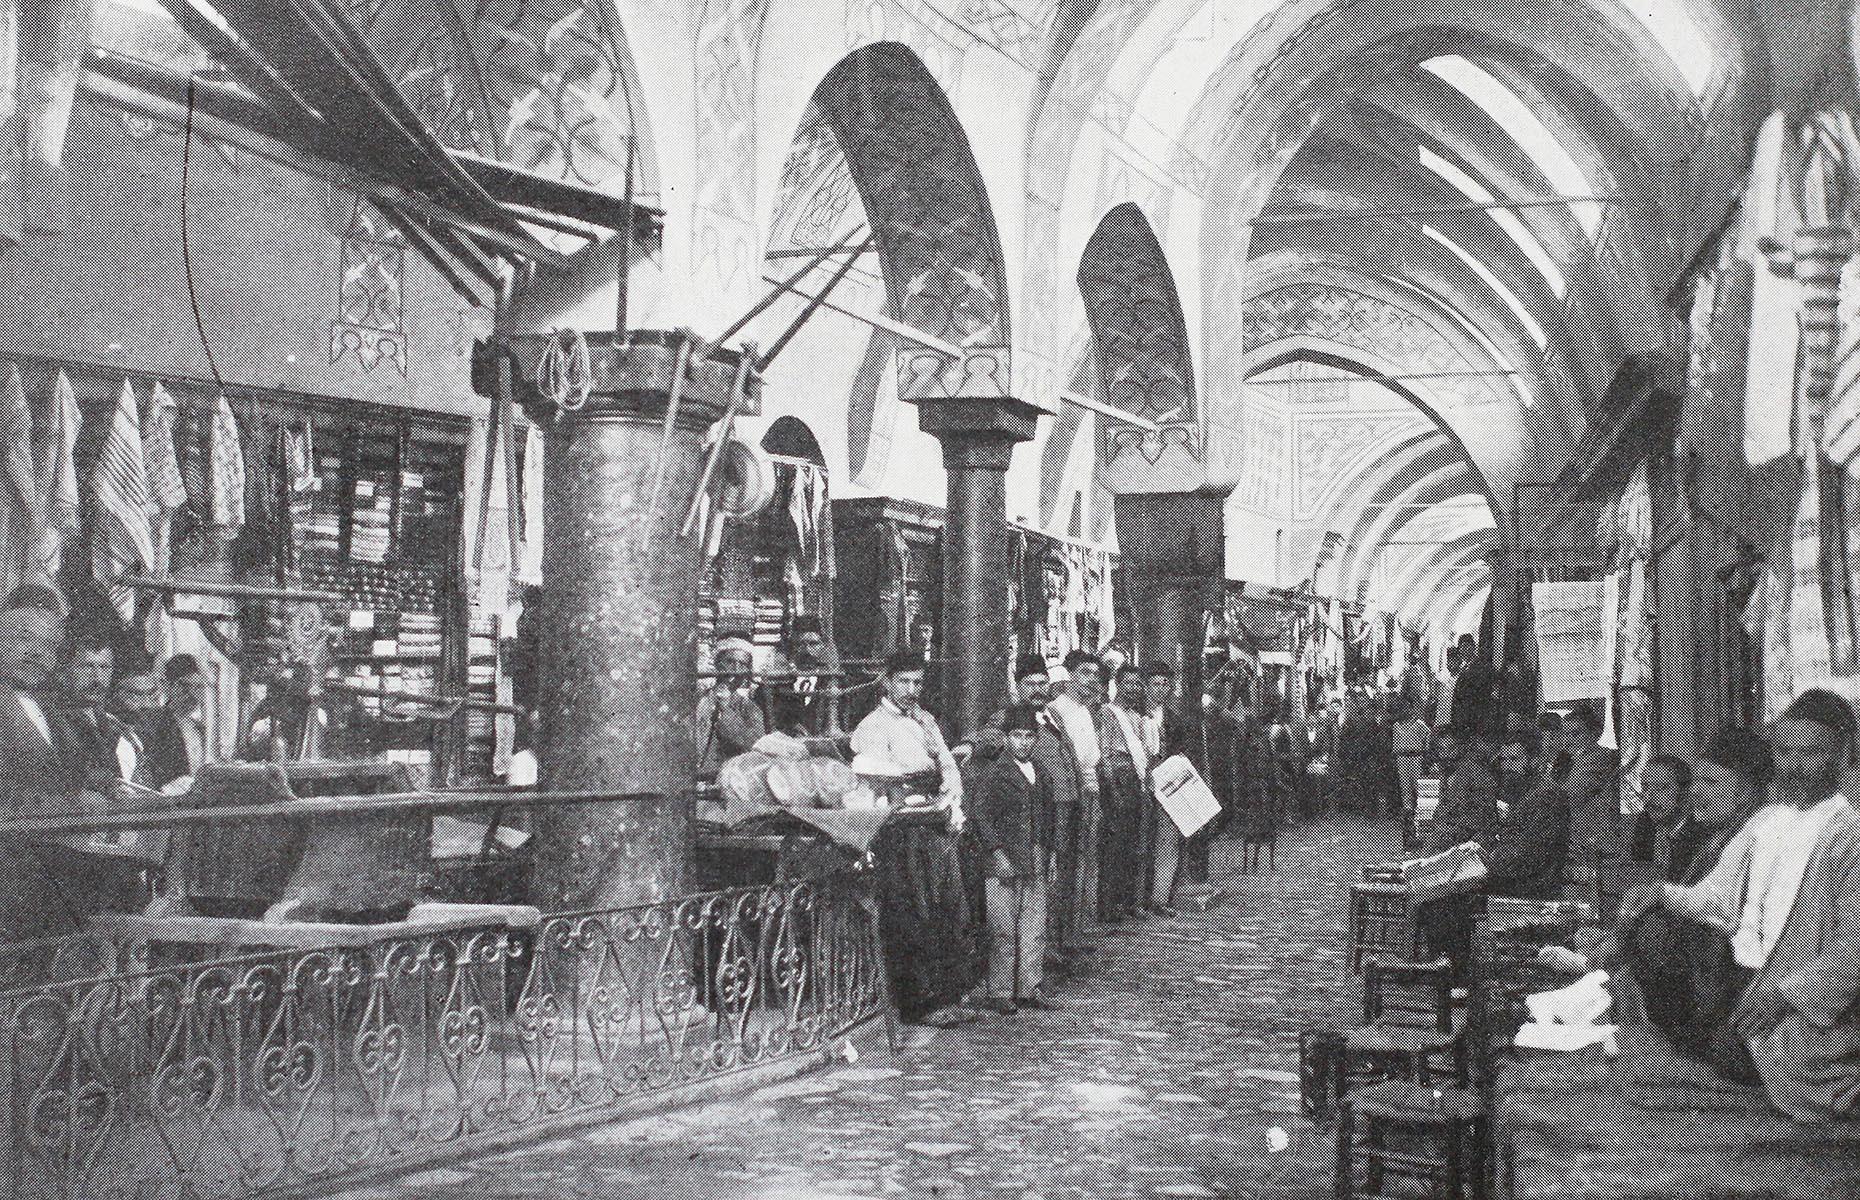 <p>This photo taken of the Grand Bazaar in Istanbul by photographer Jean Pascal Sebah in the 1890s is proof of how little things really change. To this day its vaulted interior remains beautiful and richly decorated. Merchants still stand outside their stalls beckoning you to stop and peruse their goods. And cafes still serve strong Turkish coffee and offer hookah pipes to suck on. The only differences are the goods on sale. Souvenir fezzes and ‘I Heart Istanbul’ T-shirts were few and far between in the 19th century.</p>